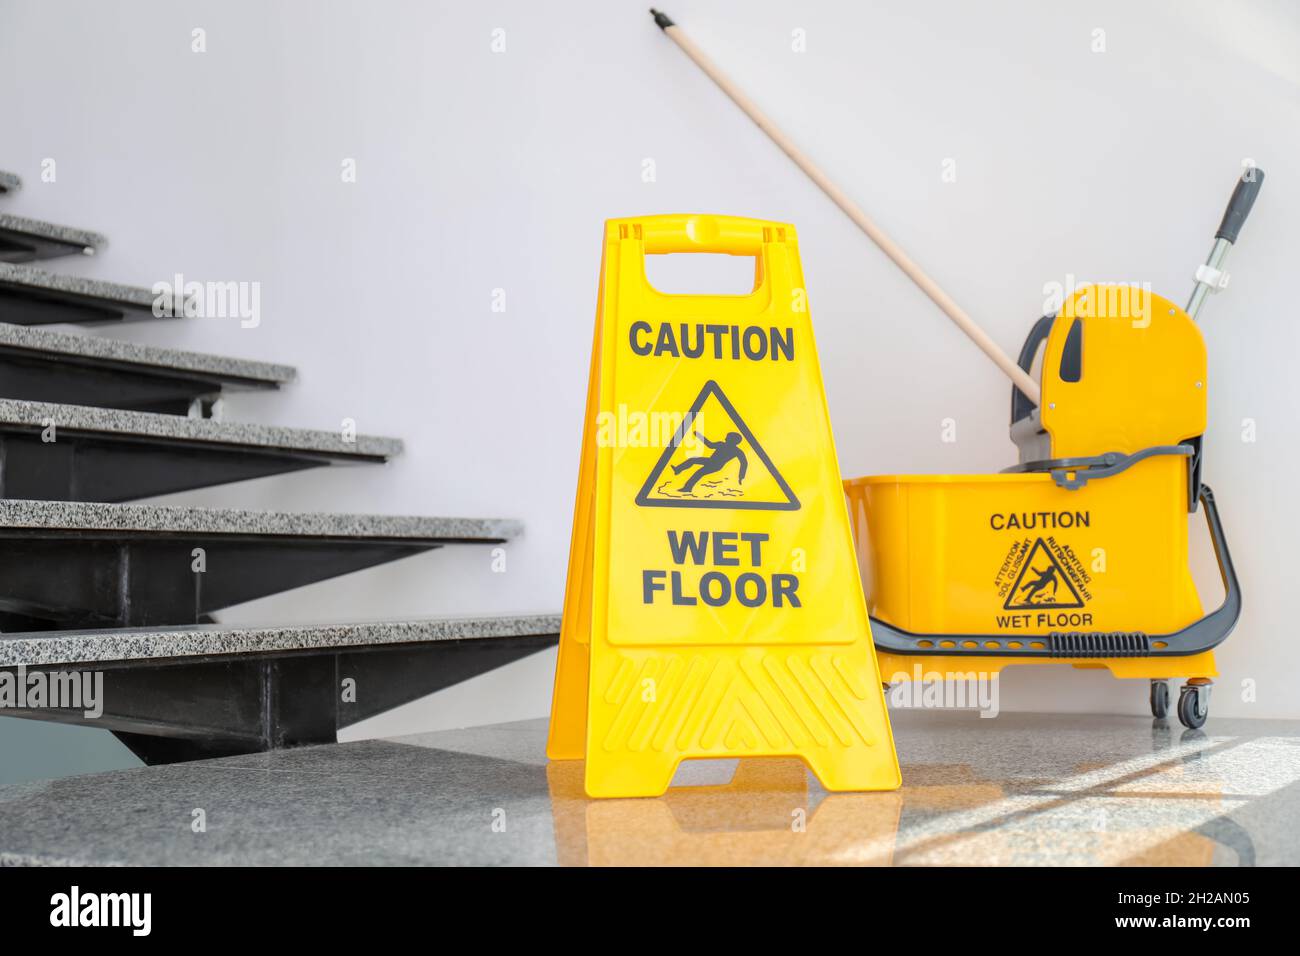 https://c8.alamy.com/comp/2H2AN05/safety-sign-with-phrase-caution-wet-floor-and-mop-bucket-near-stairs-cleaning-service-2H2AN05.jpg